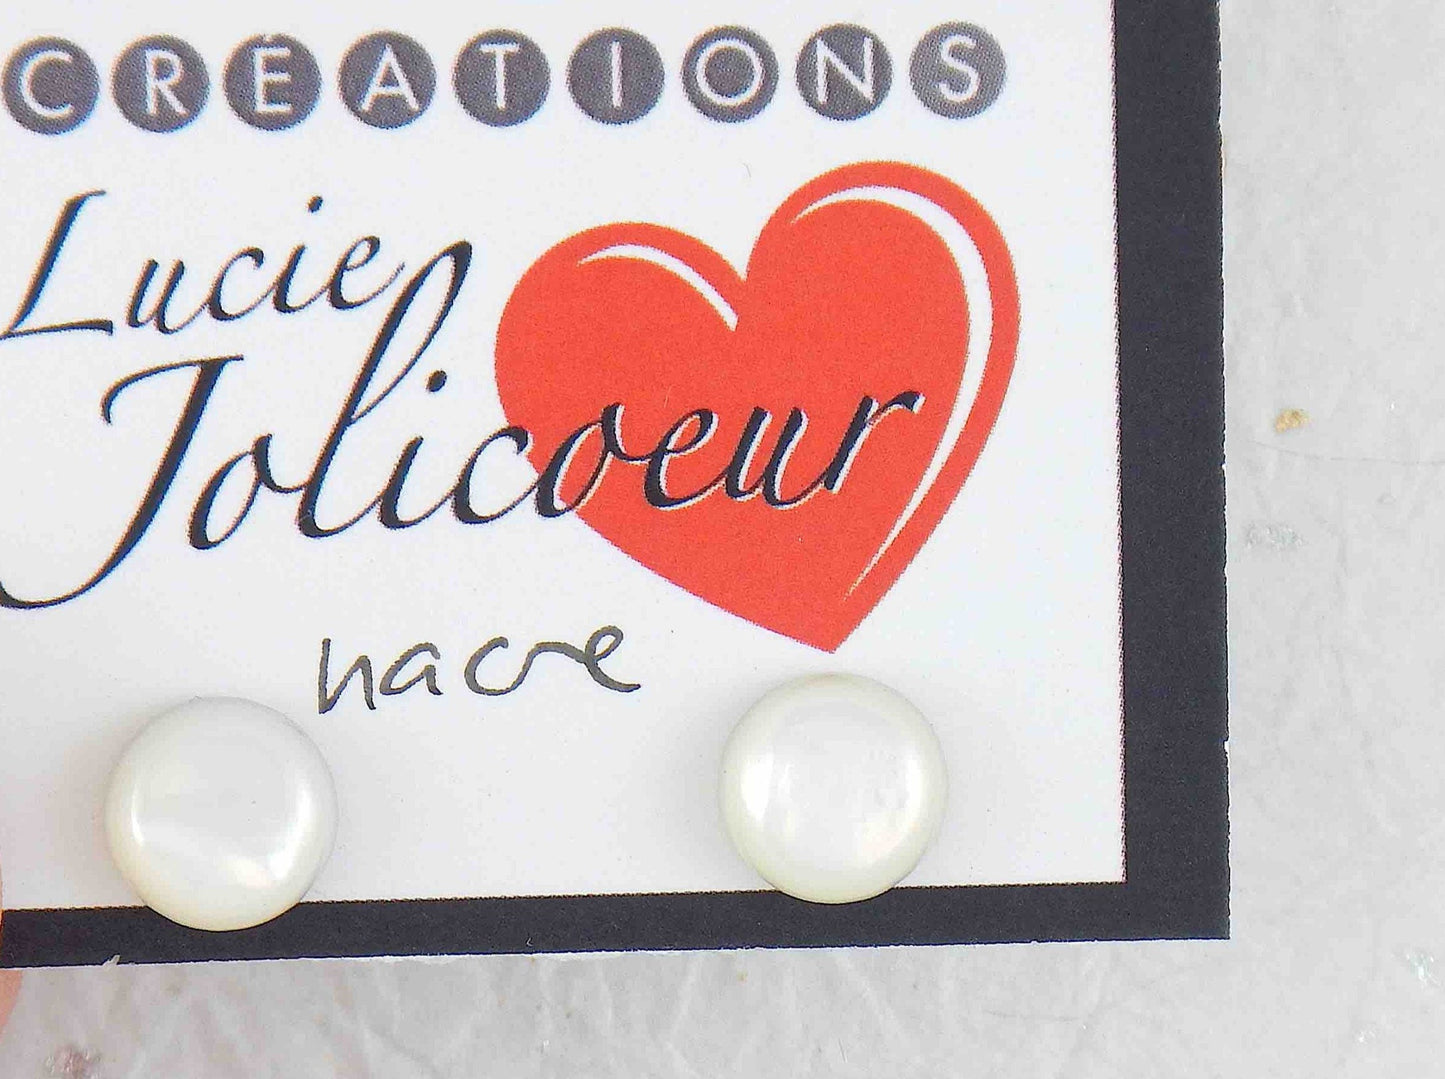 Ear studs with 8mm round iridescent white mother of pearl cabochons, stainless steel posts